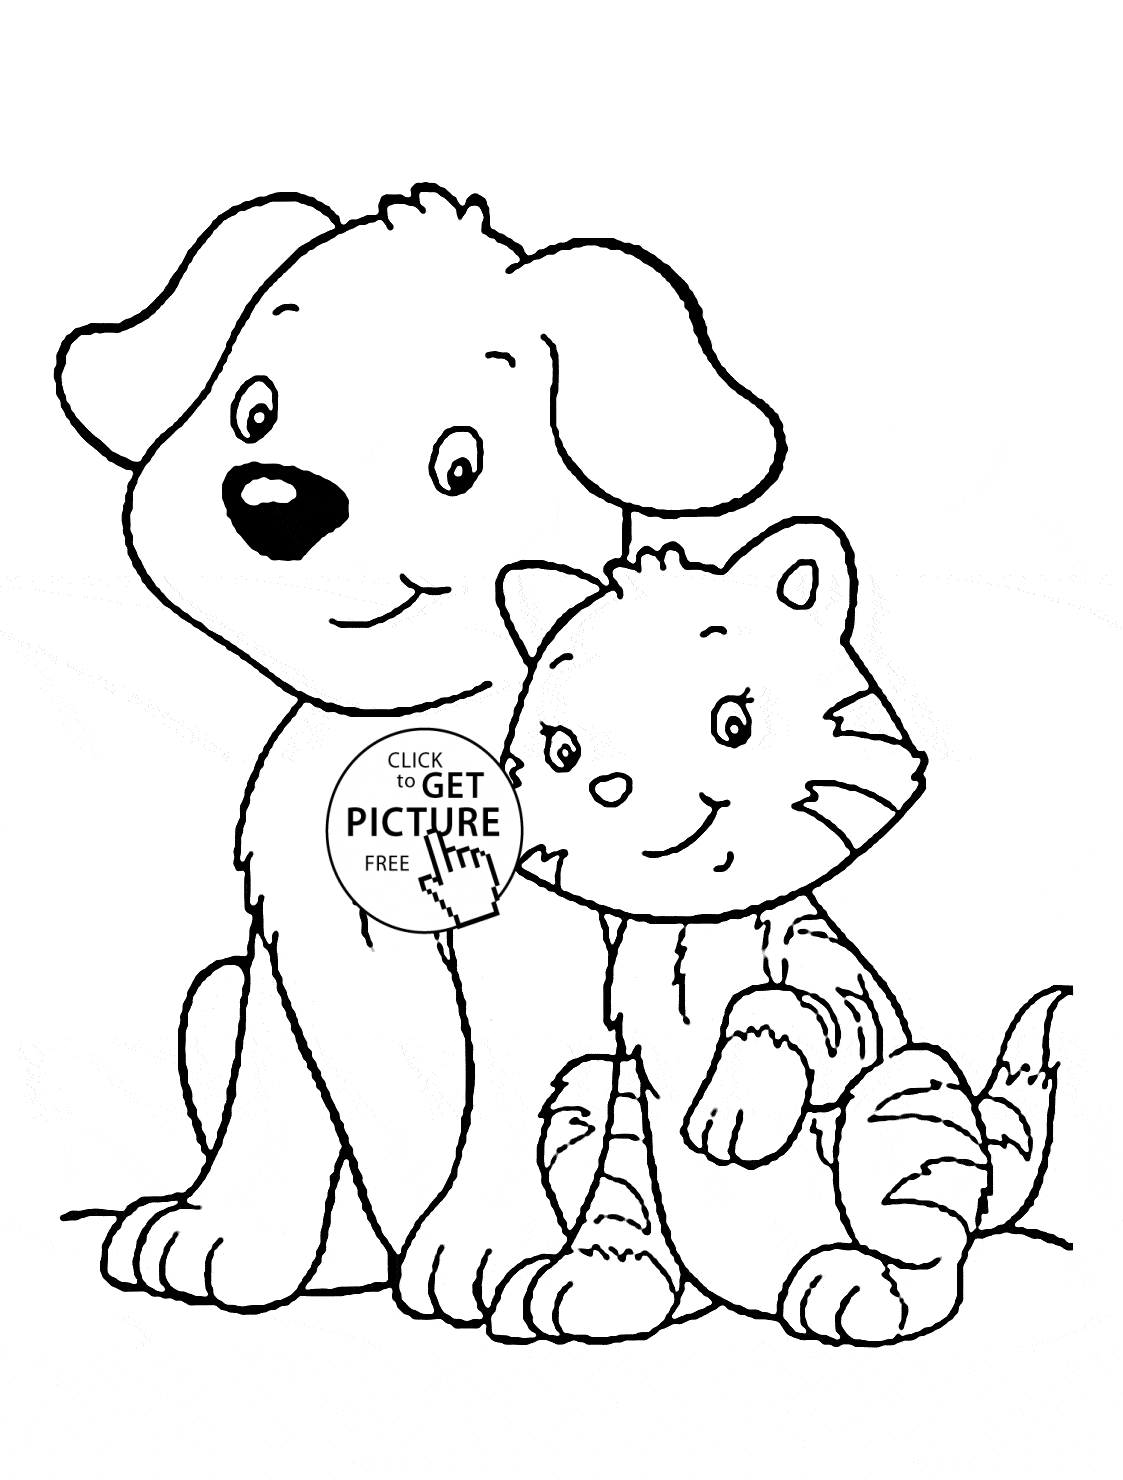 Cat and Dog coloring page for kids, animal coloring pages ...